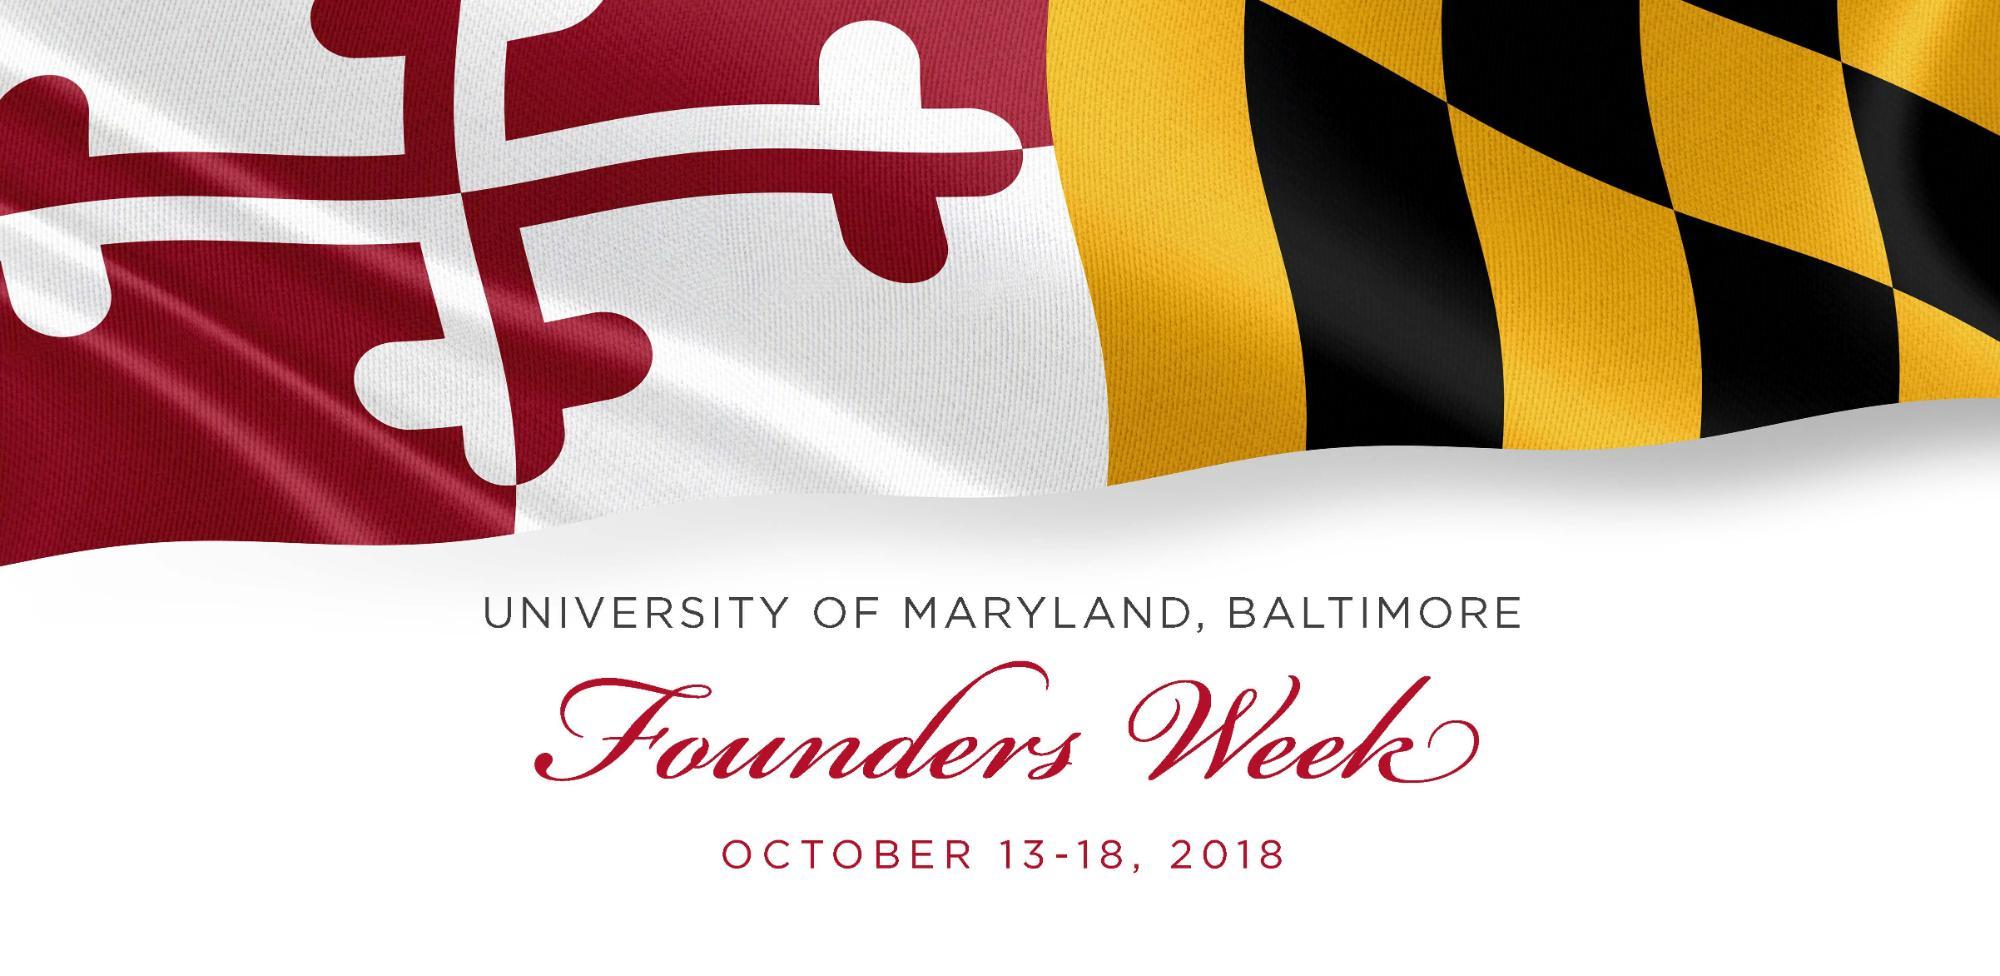 University of Maryland, Baltimore Founders Week - October 13th to 18th, 2018